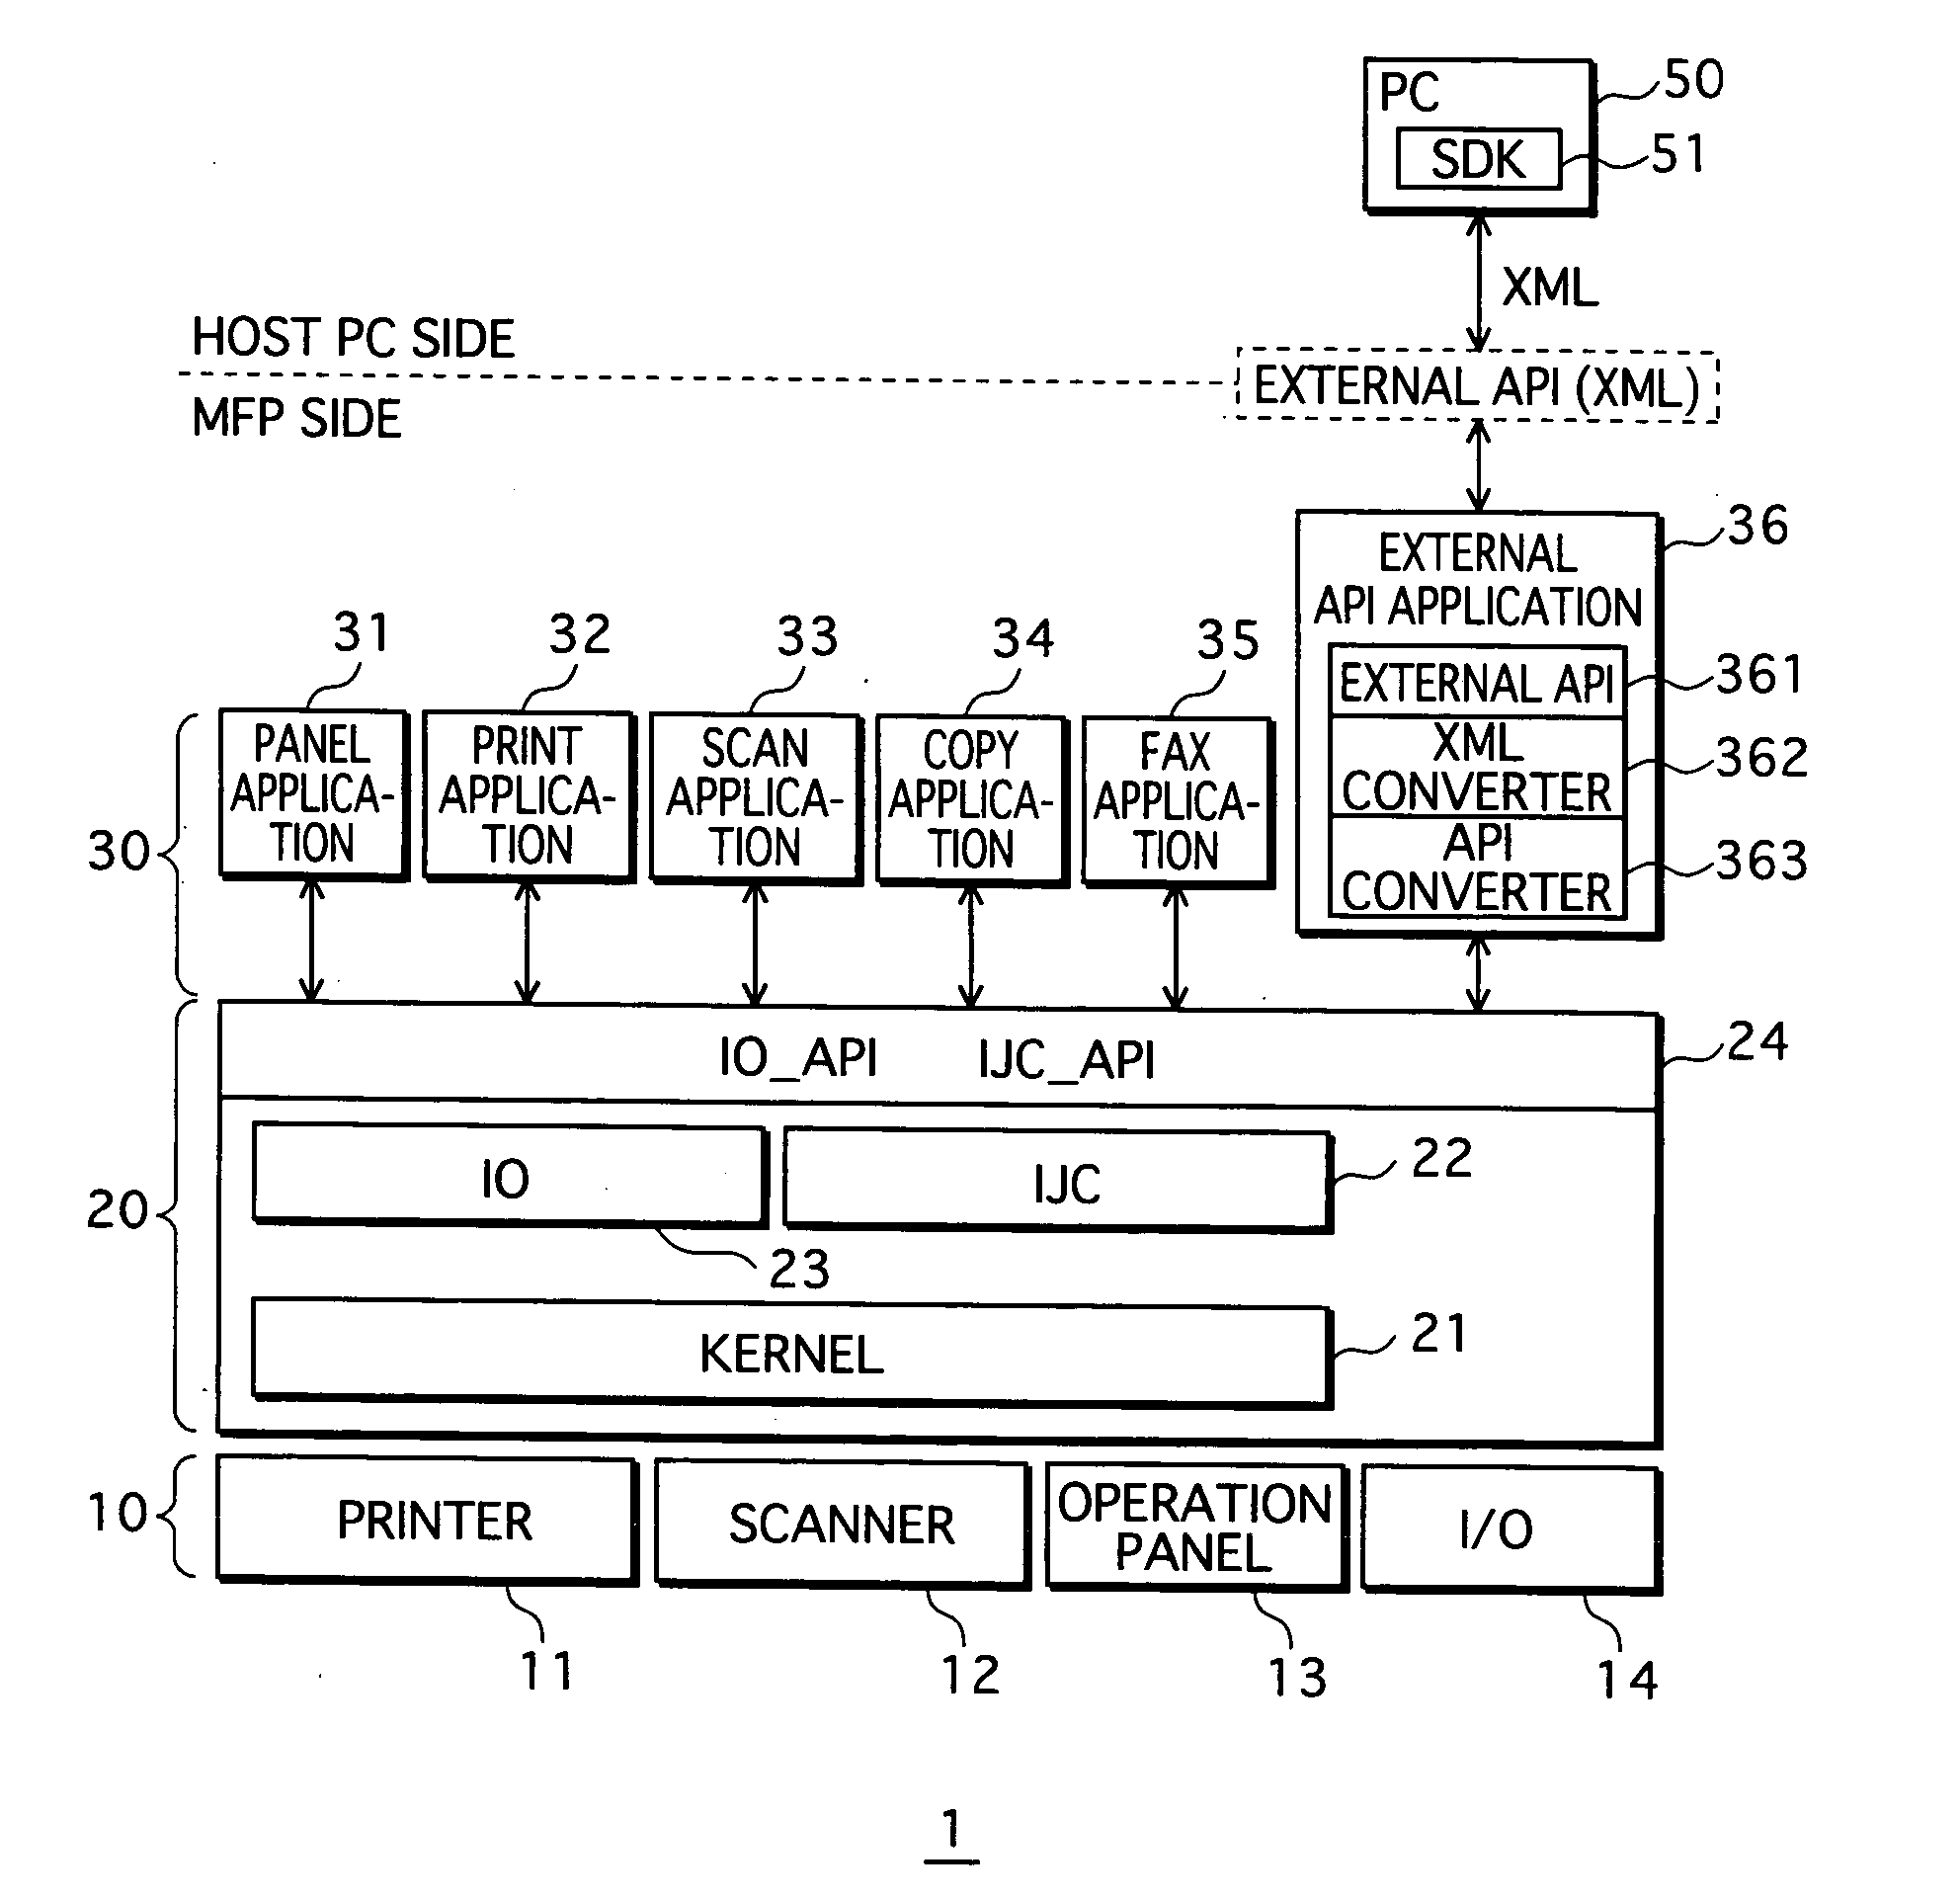 Image processing apparatus for receiving a request relating to image processing from an external source and executing the received request